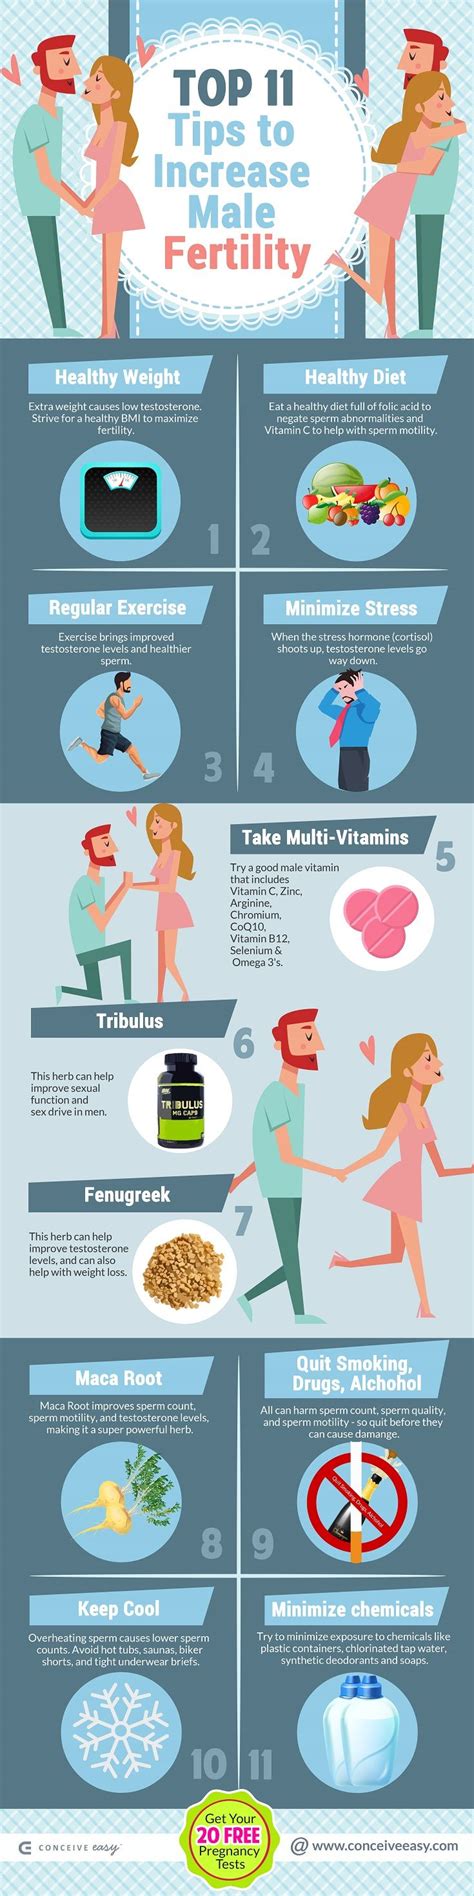 Top Tips To Increase Male Fertility Infographic Natural Fertility Boosters Fertility Health